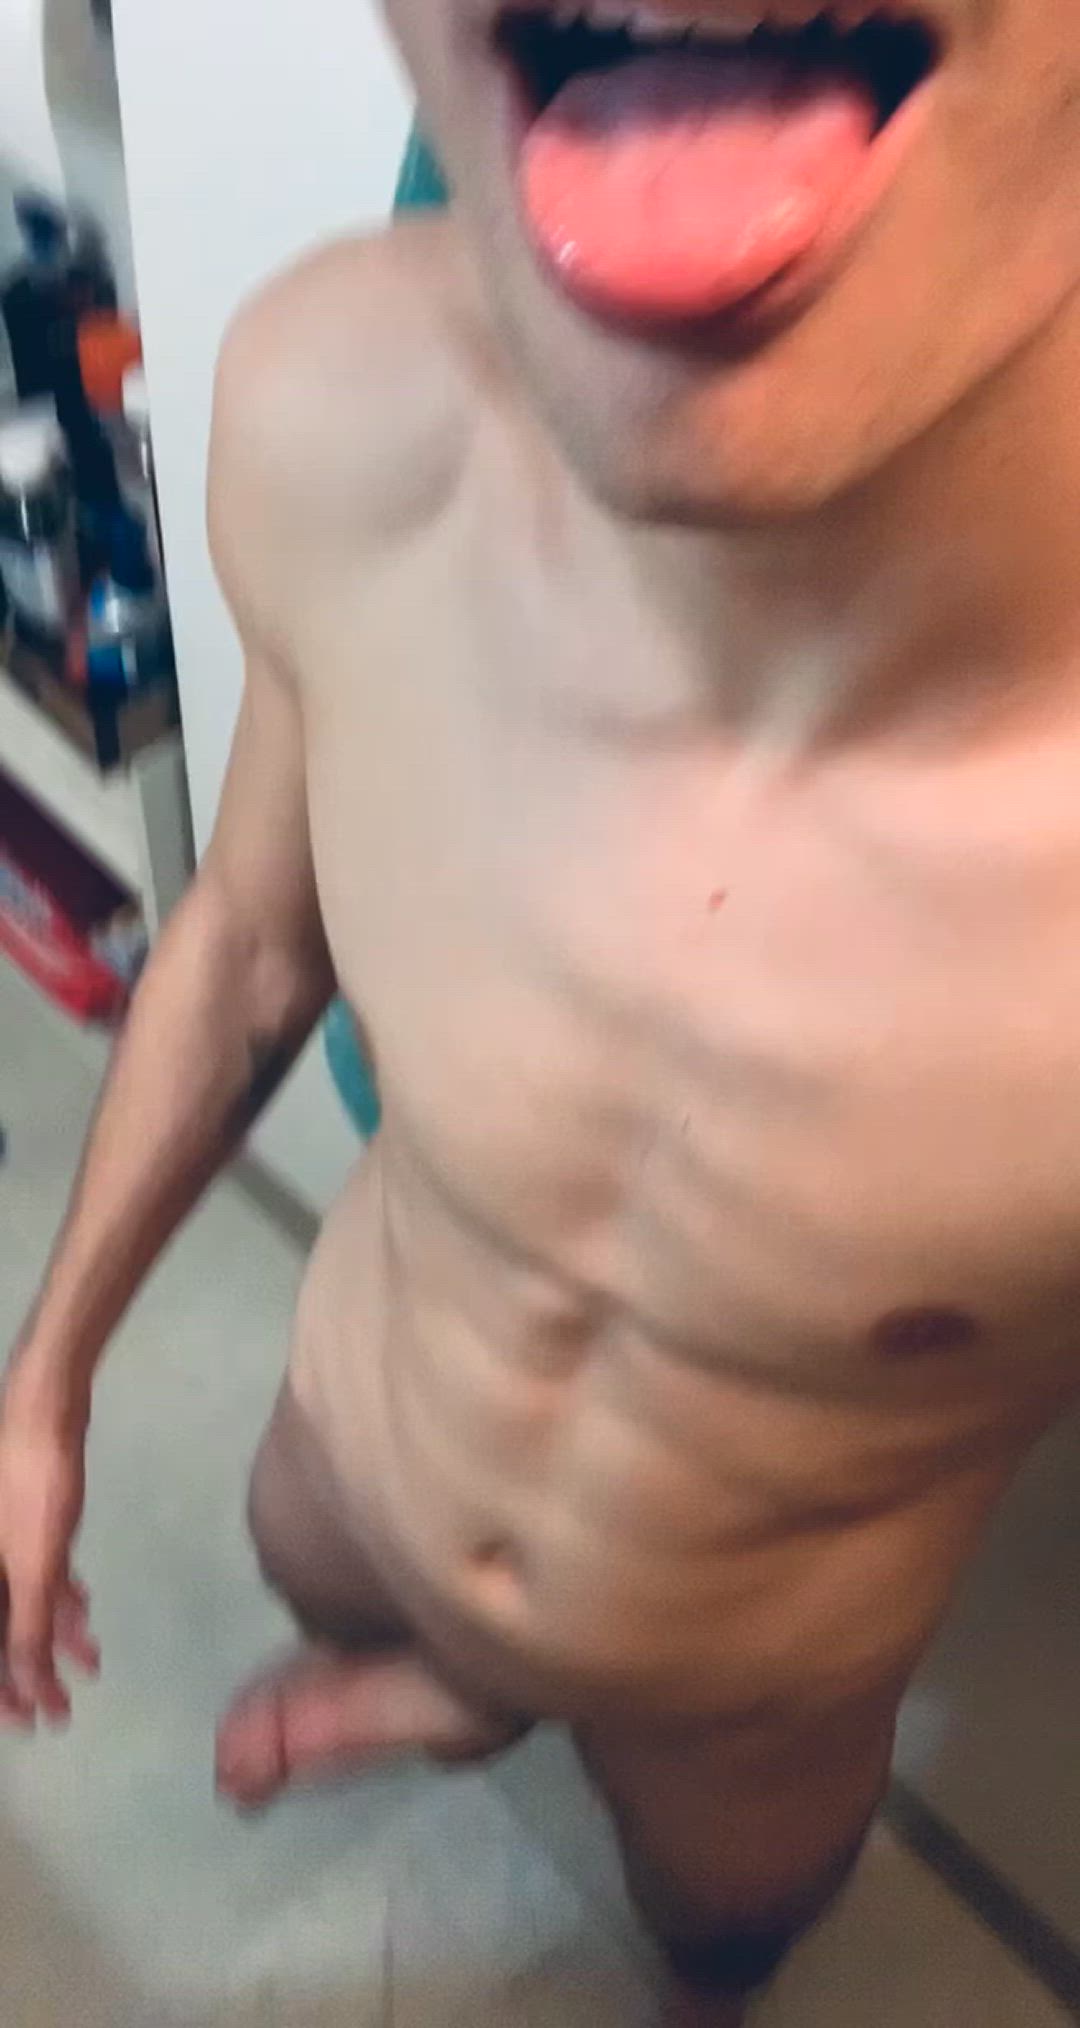 Amateur porn video with onlyfans model Luke <strong>@lukexxxwarm</strong>